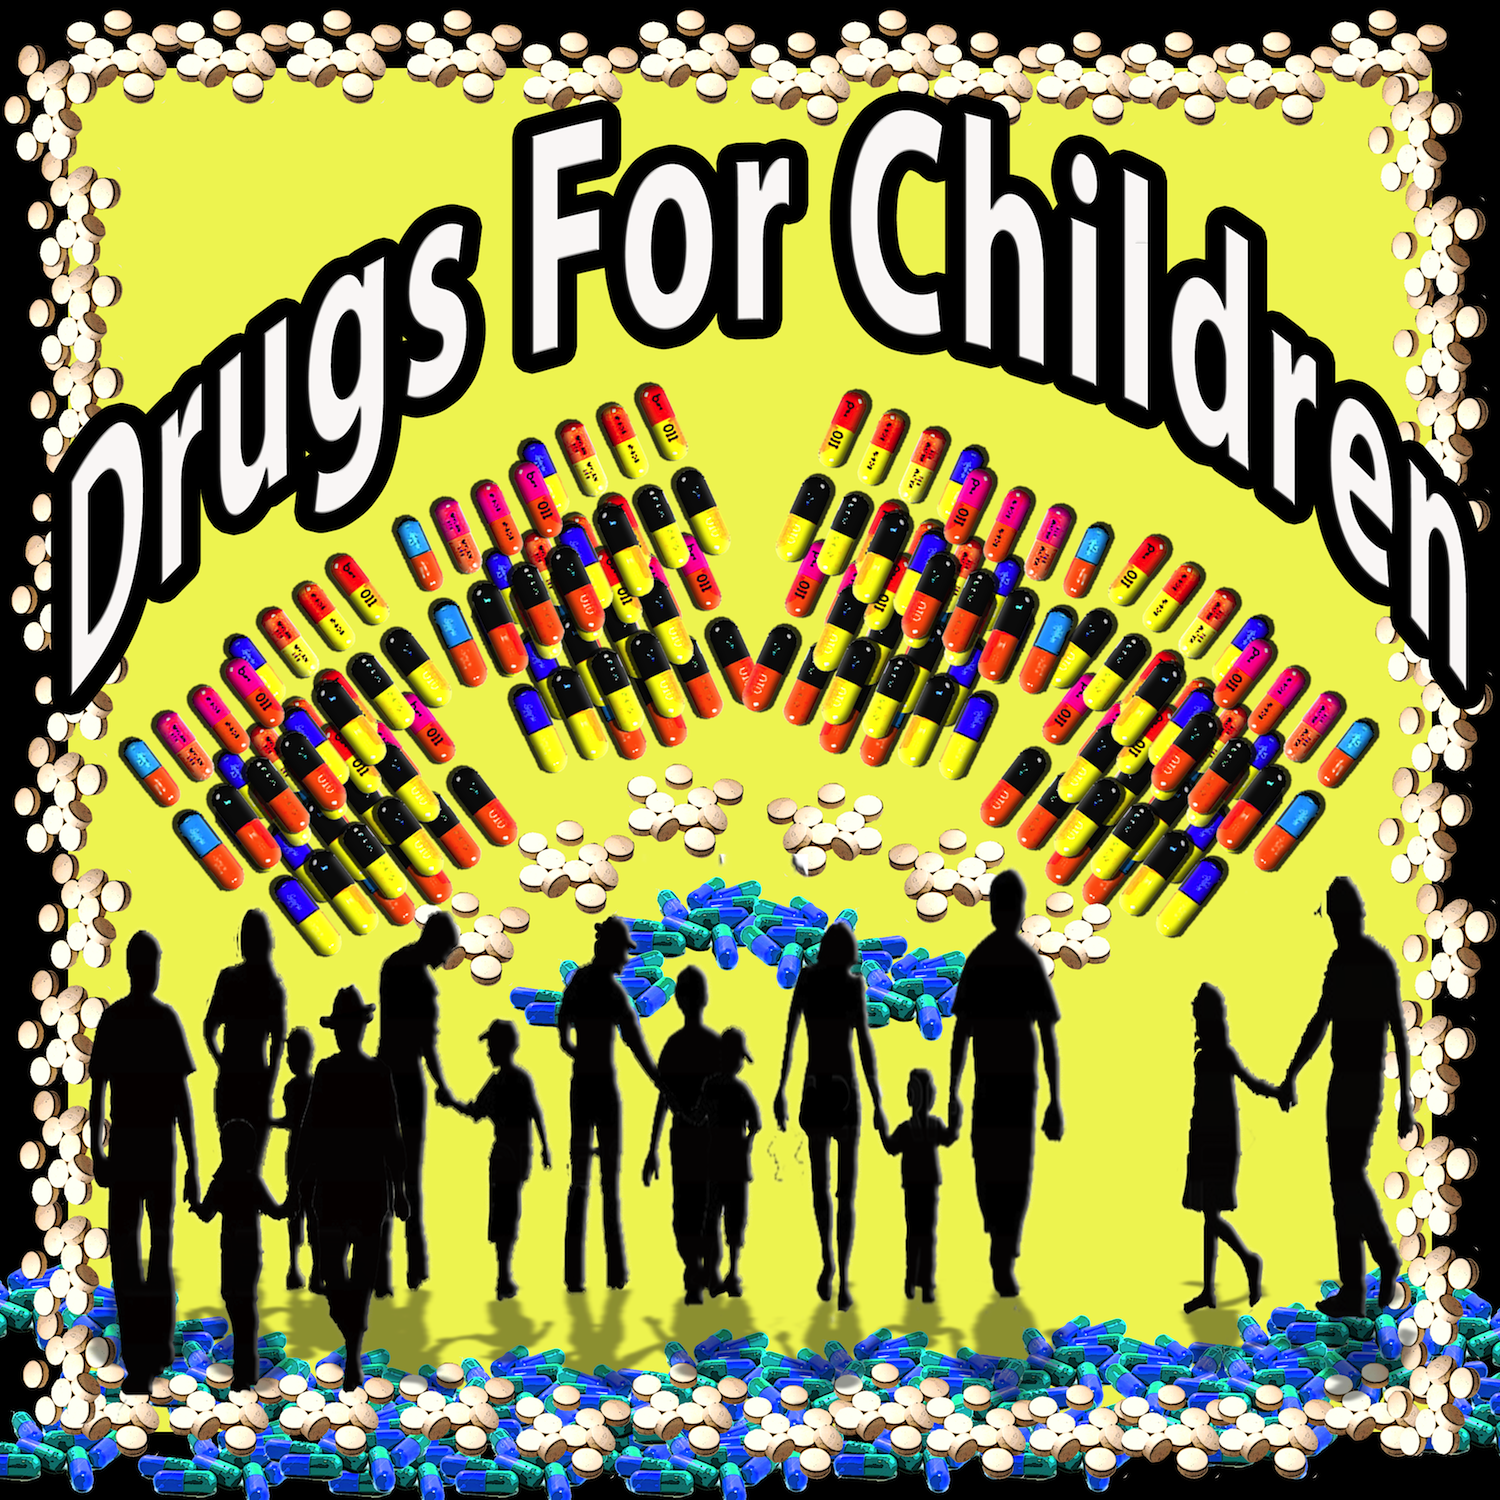 Michael Olson Food Chain Radio: How should a culture that feeds its children psychotropic medications be judged?